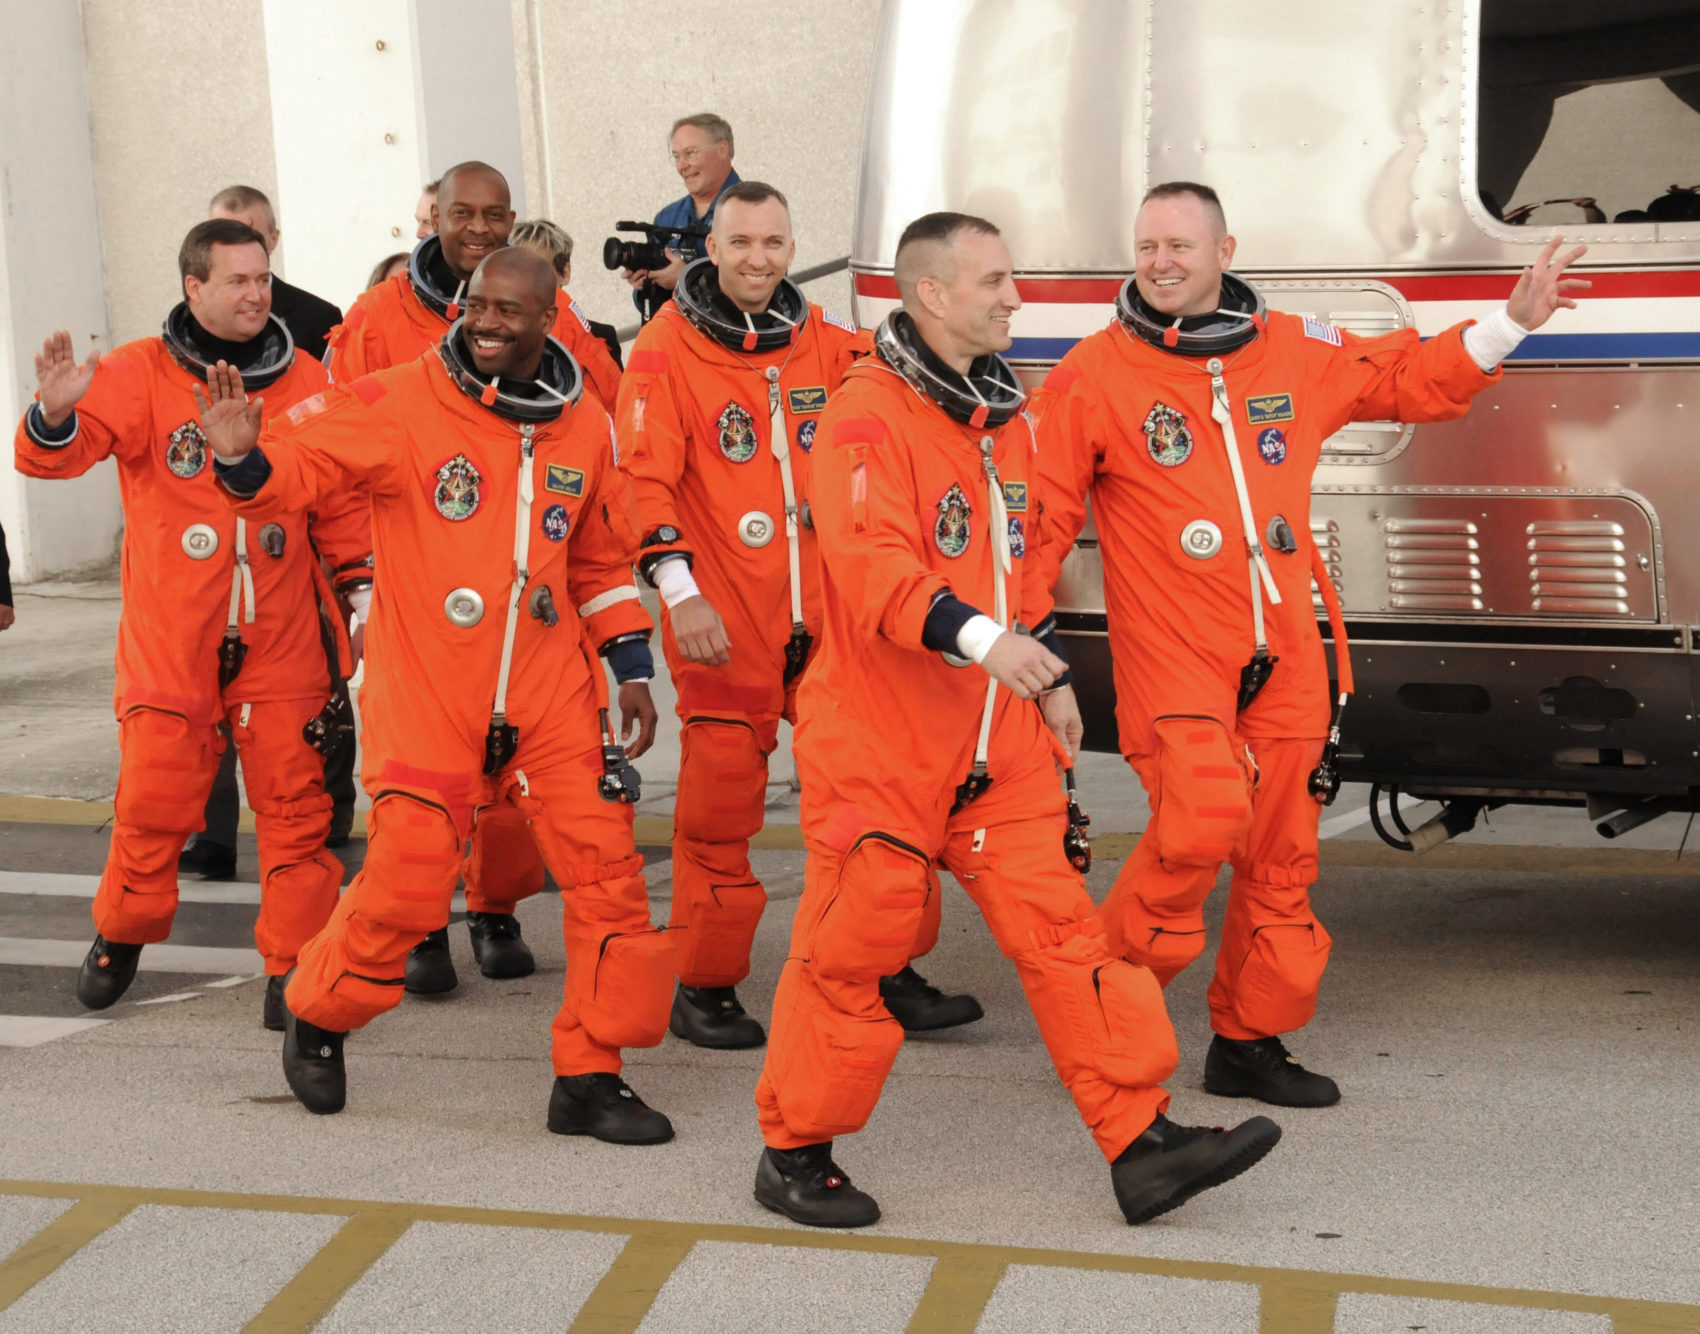 Leland Melvin and his five crew mates of the US Space Shuttle Atlantis, en route to the International Space Station in 2009. (BRUCE WEAVER/Getty Images)